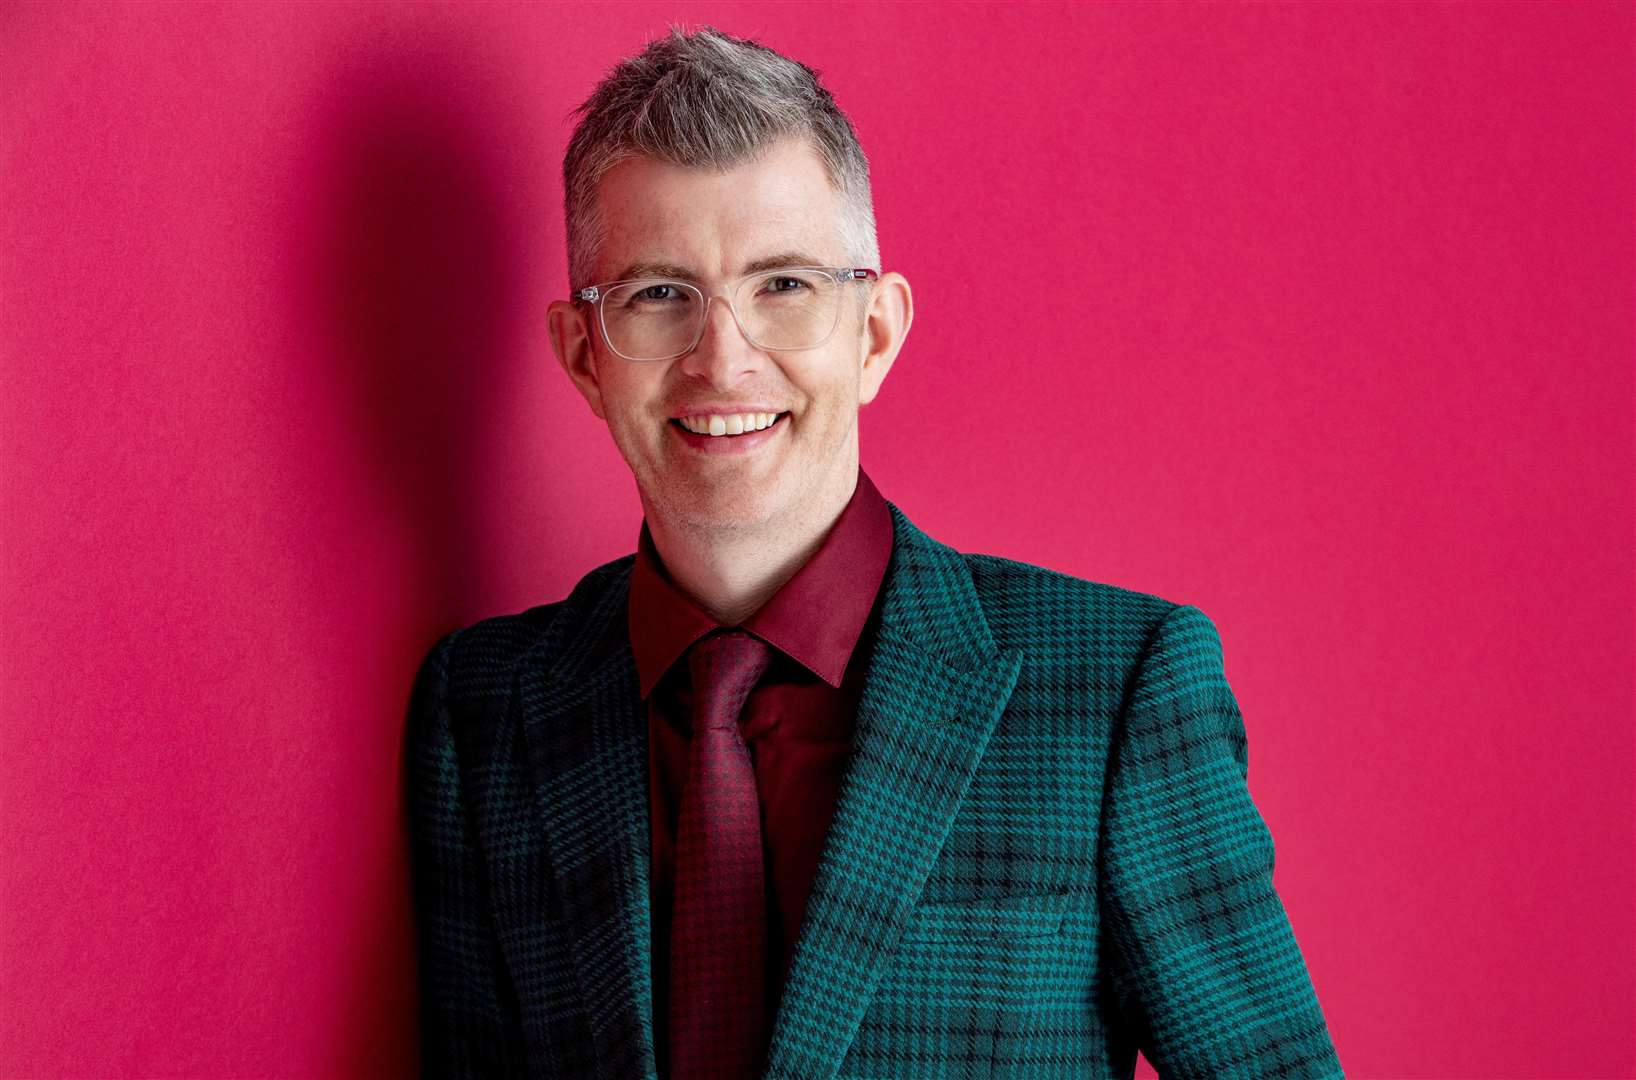 Singer, choirmaster and TV personality Gareth Malone is coming to Tunbridge Wells. Picture: Supplied by Ella Reading